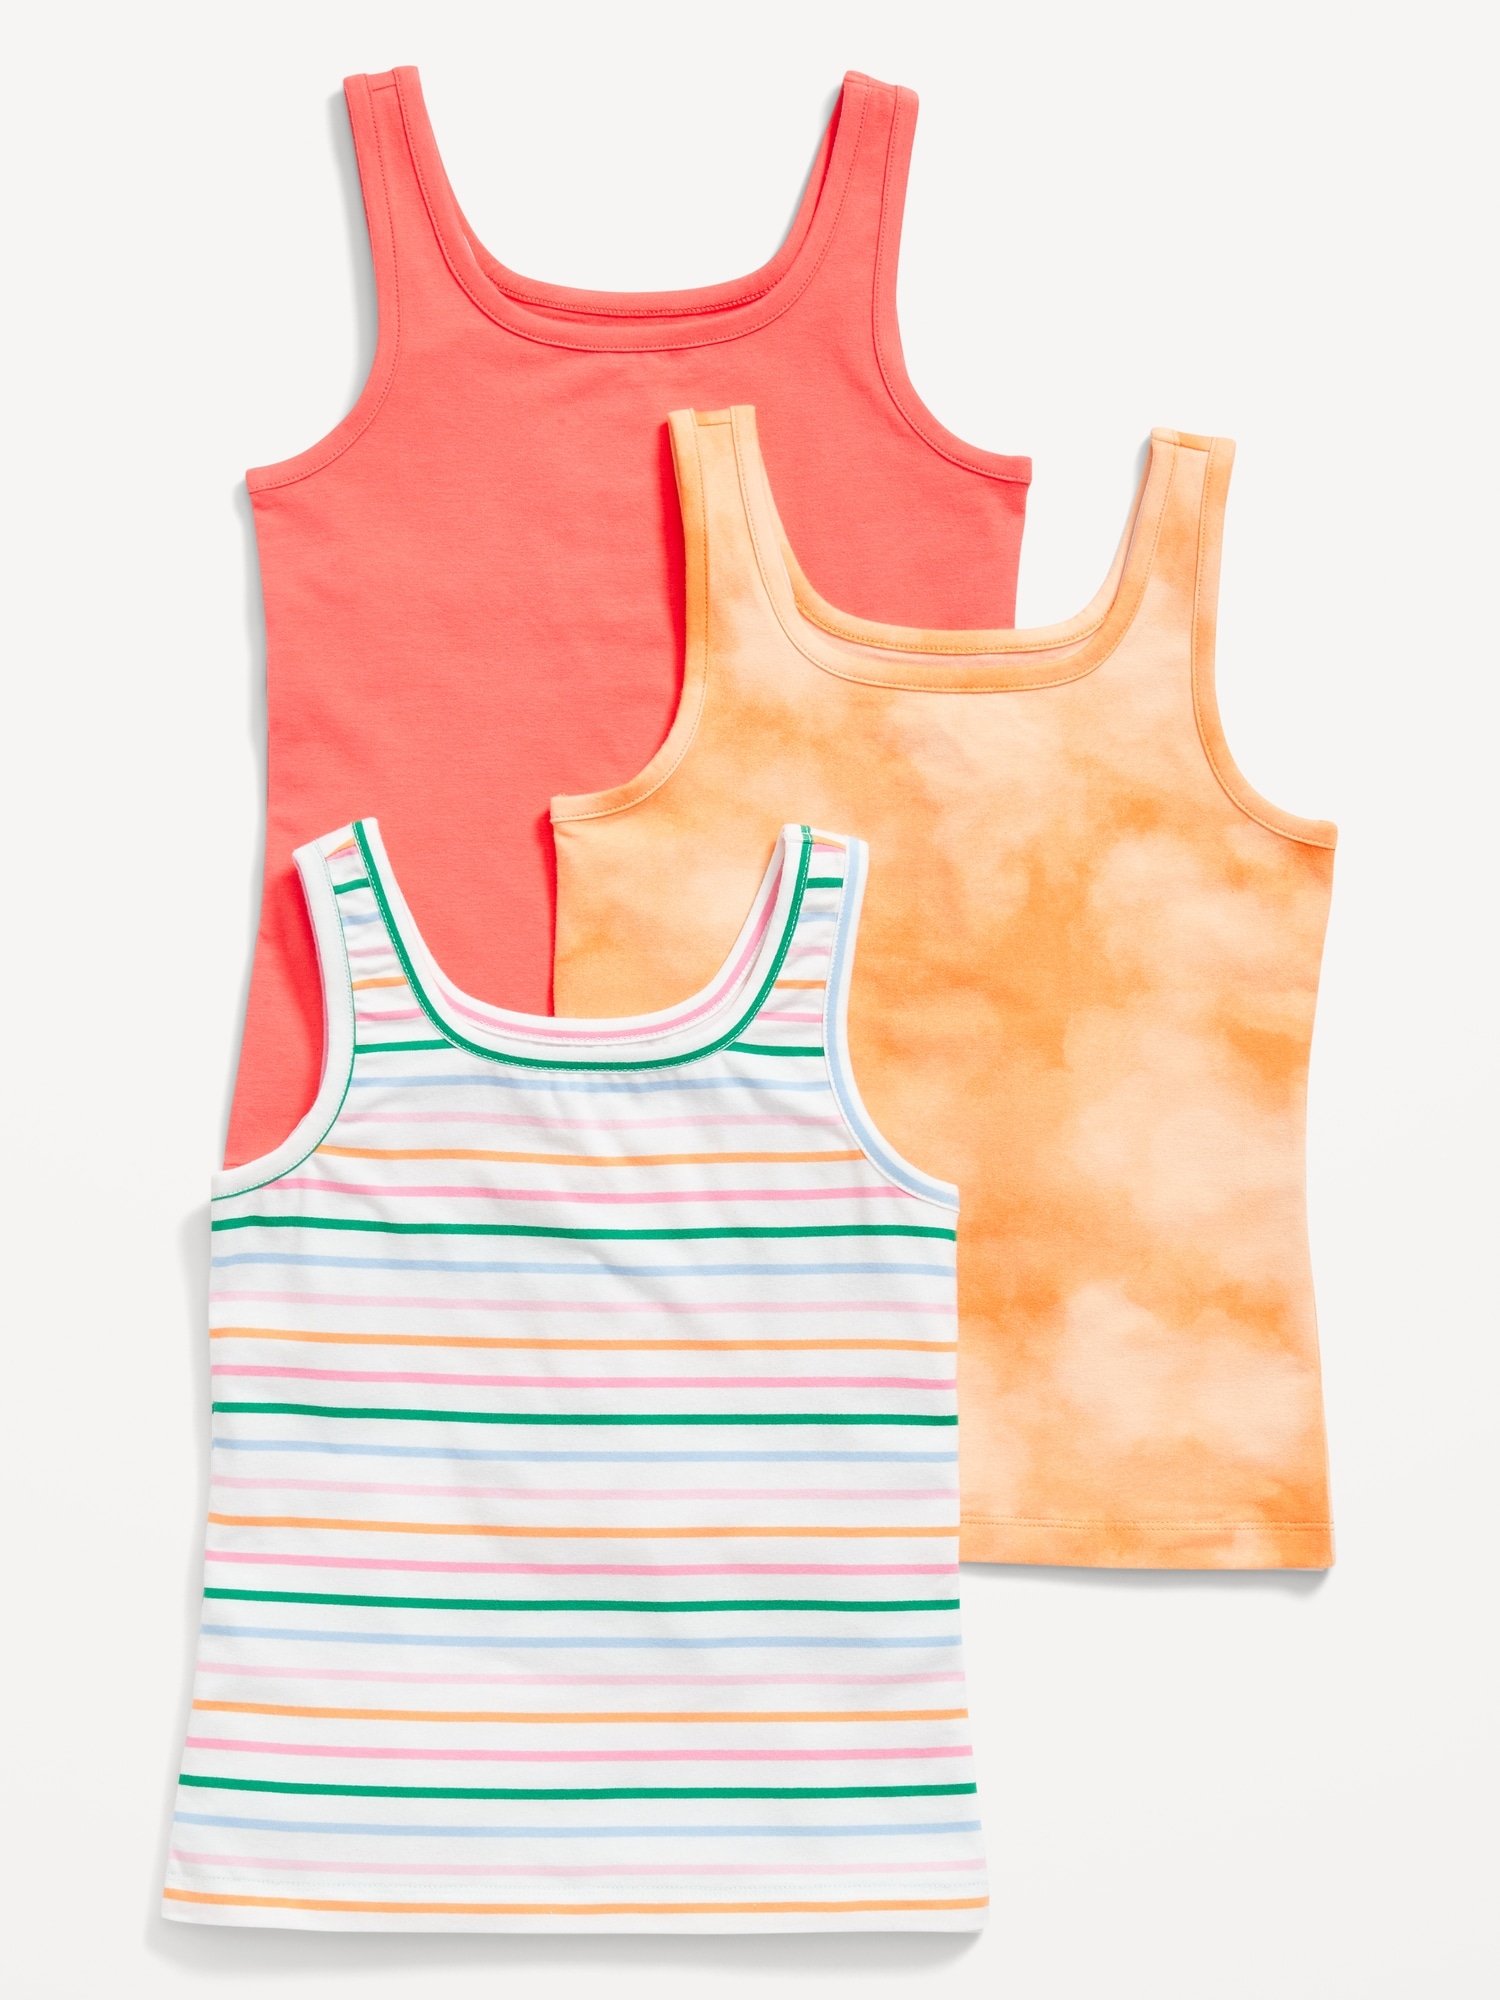 Cute Tank Tops for Girls